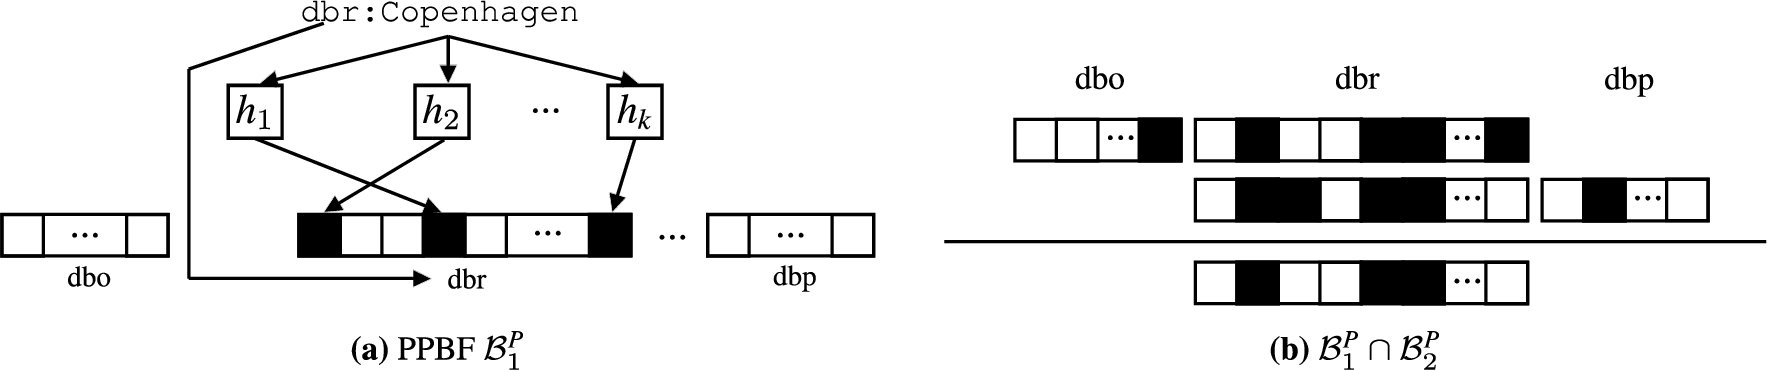 Example of (a) inserting an IRI into a PPBF B1P and (b) intersection between two PPBFs B1P∩B2P [5].